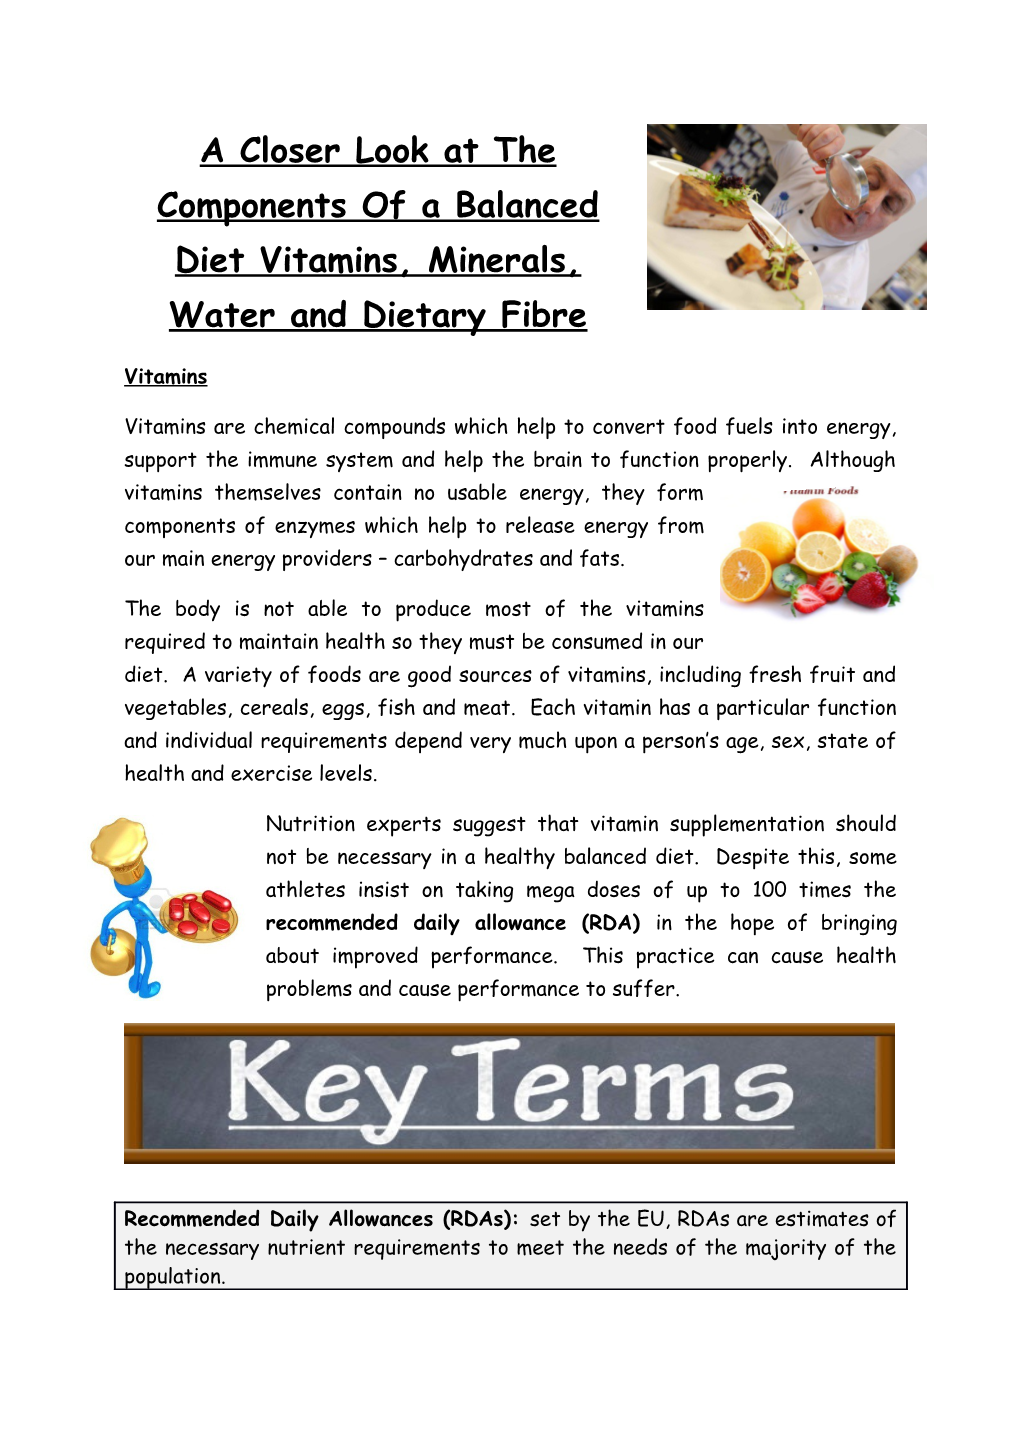 A Closer Look at the Components of a Balanced Diet Vitamins, Minerals, Water and Dietary Fibre